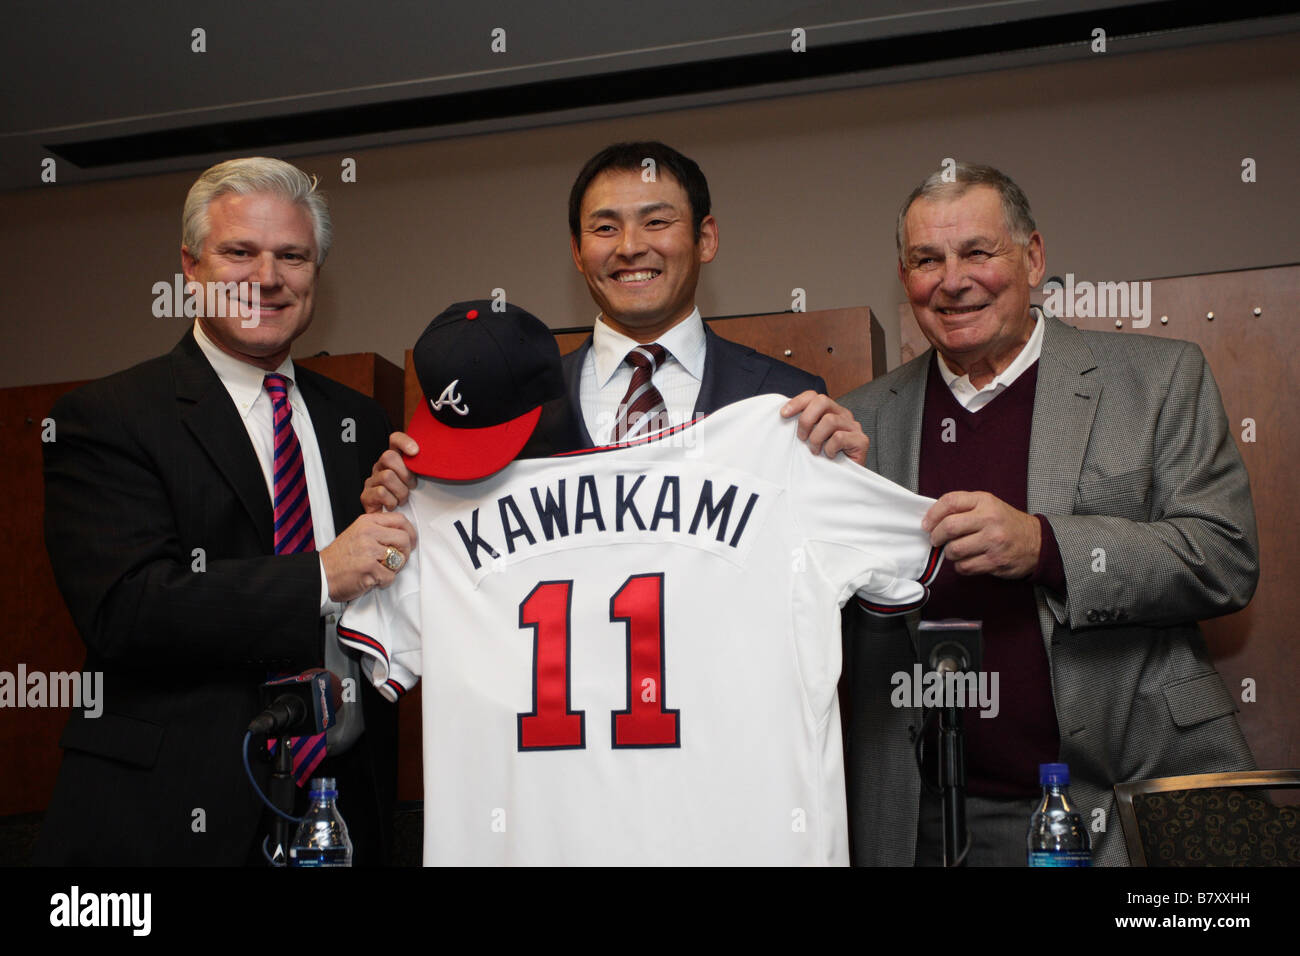 Kenshin Kawakami Braves JANUARY 13 2009 MLB New Atlanta Braves pitcher Kenshin Kawakami C attends a press conference with General Manager Frank Wren L and manager Bobby Cox at Turner Field in Atlanta Georgia USA Photo by Thomas Anderson AFLO 0903 JAPANESE NEWSPAPER OUT Stock Photo